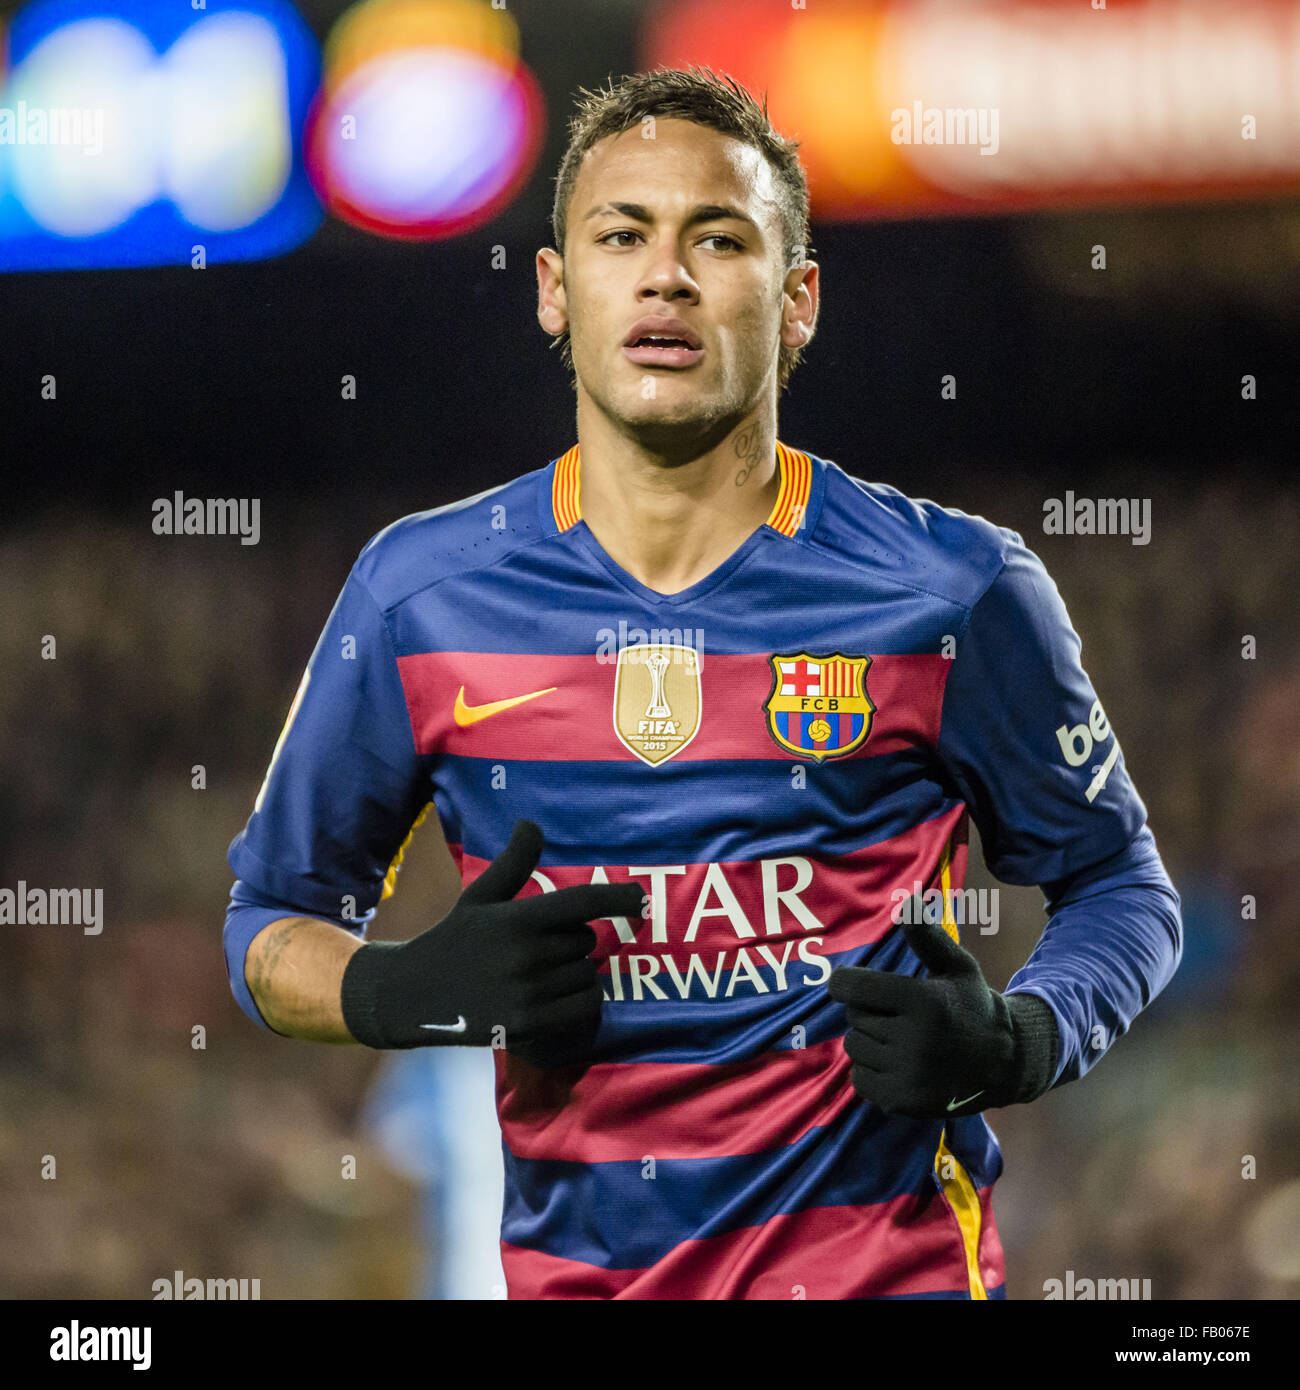 Barcelona Catalonia Spain 6th Jan 16 Fc Barcelona S Forward Neymar Jr During The Copa Del Rey King S Cup Last Of 16 First Leg Match Between Fc Barcelona And Rcd Espanyol At The